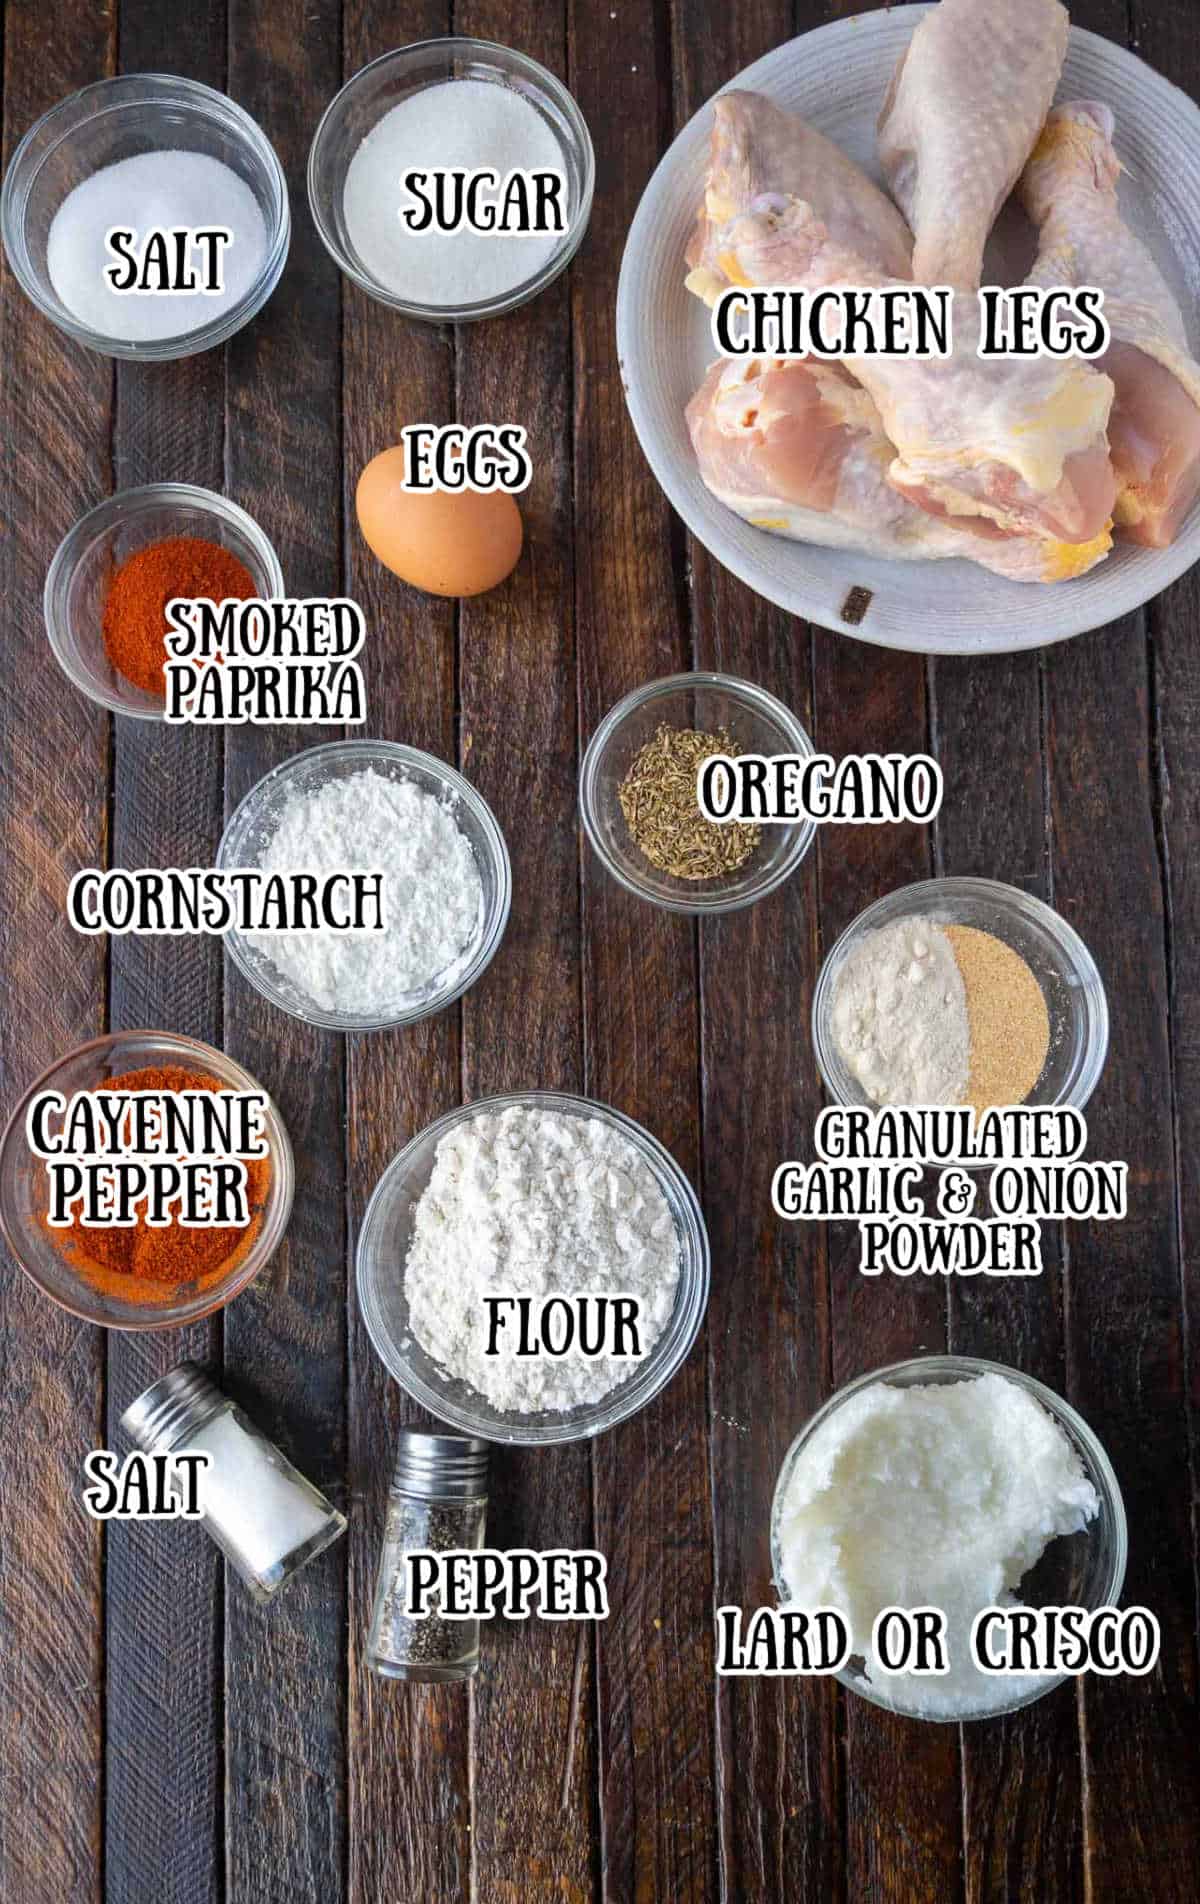 All the ingredients needed for this fried chicken